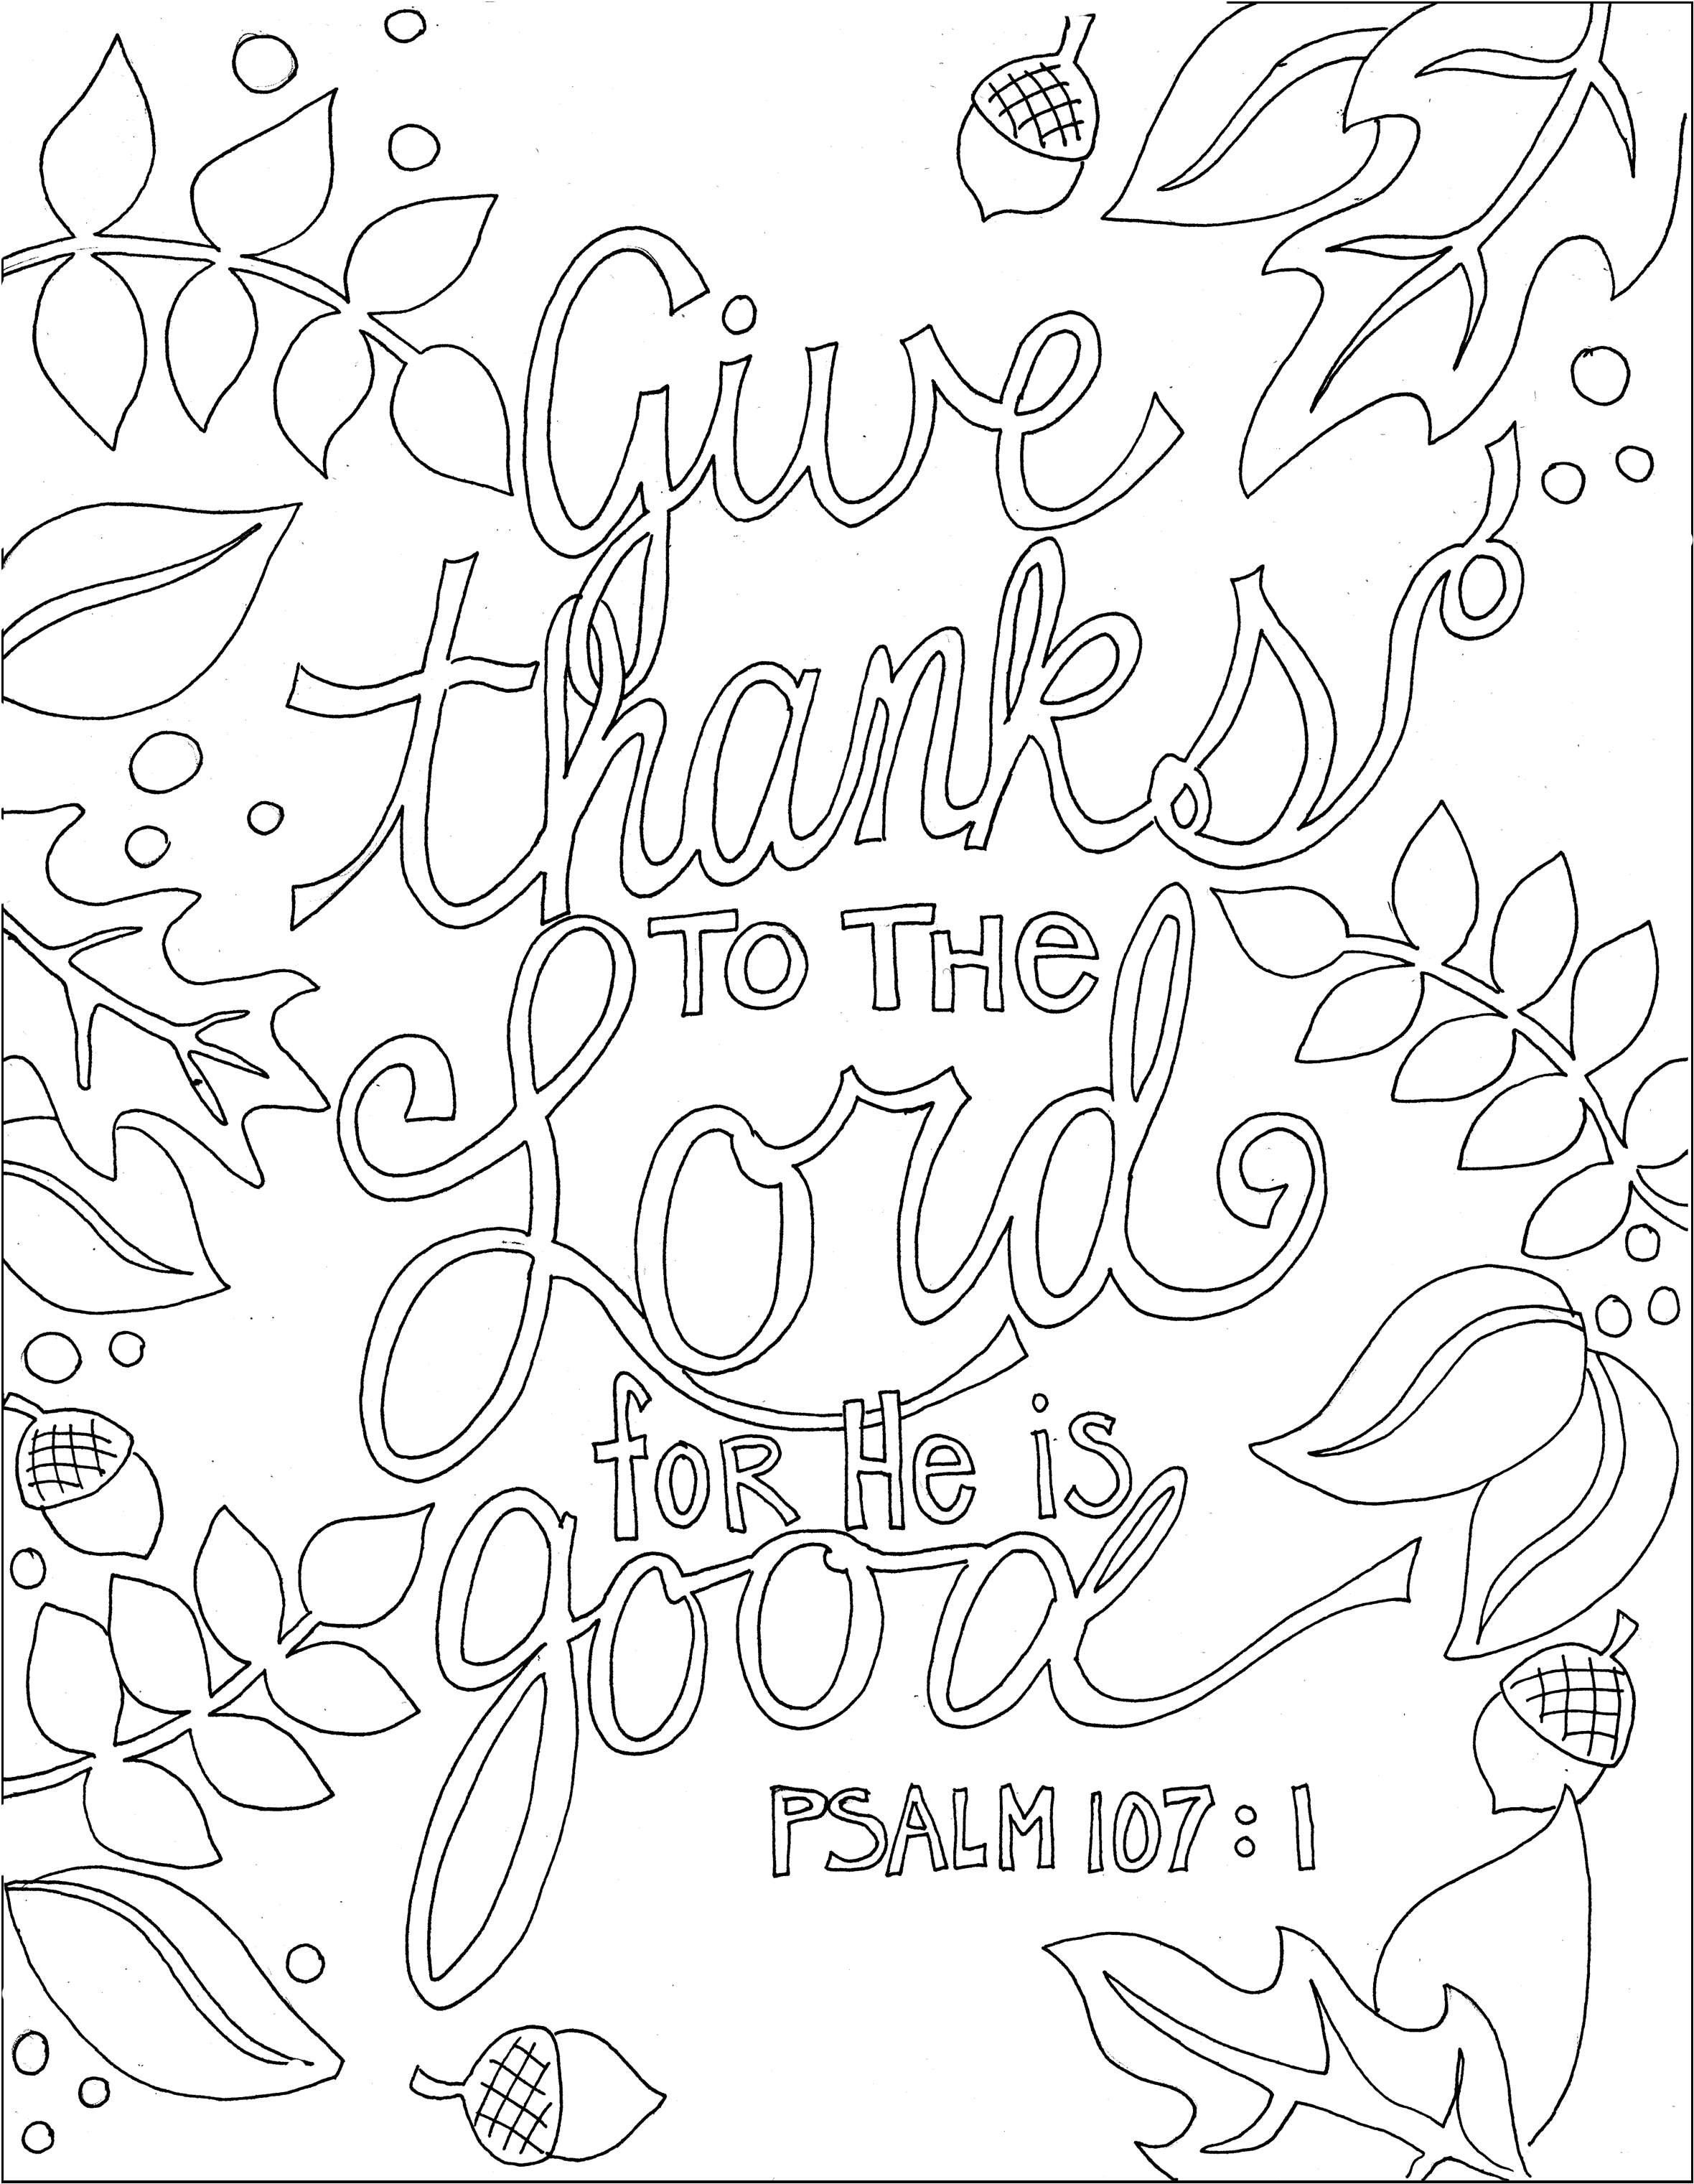 Bible Verse Coloring Page Coloring Pages For Kids And For Adults